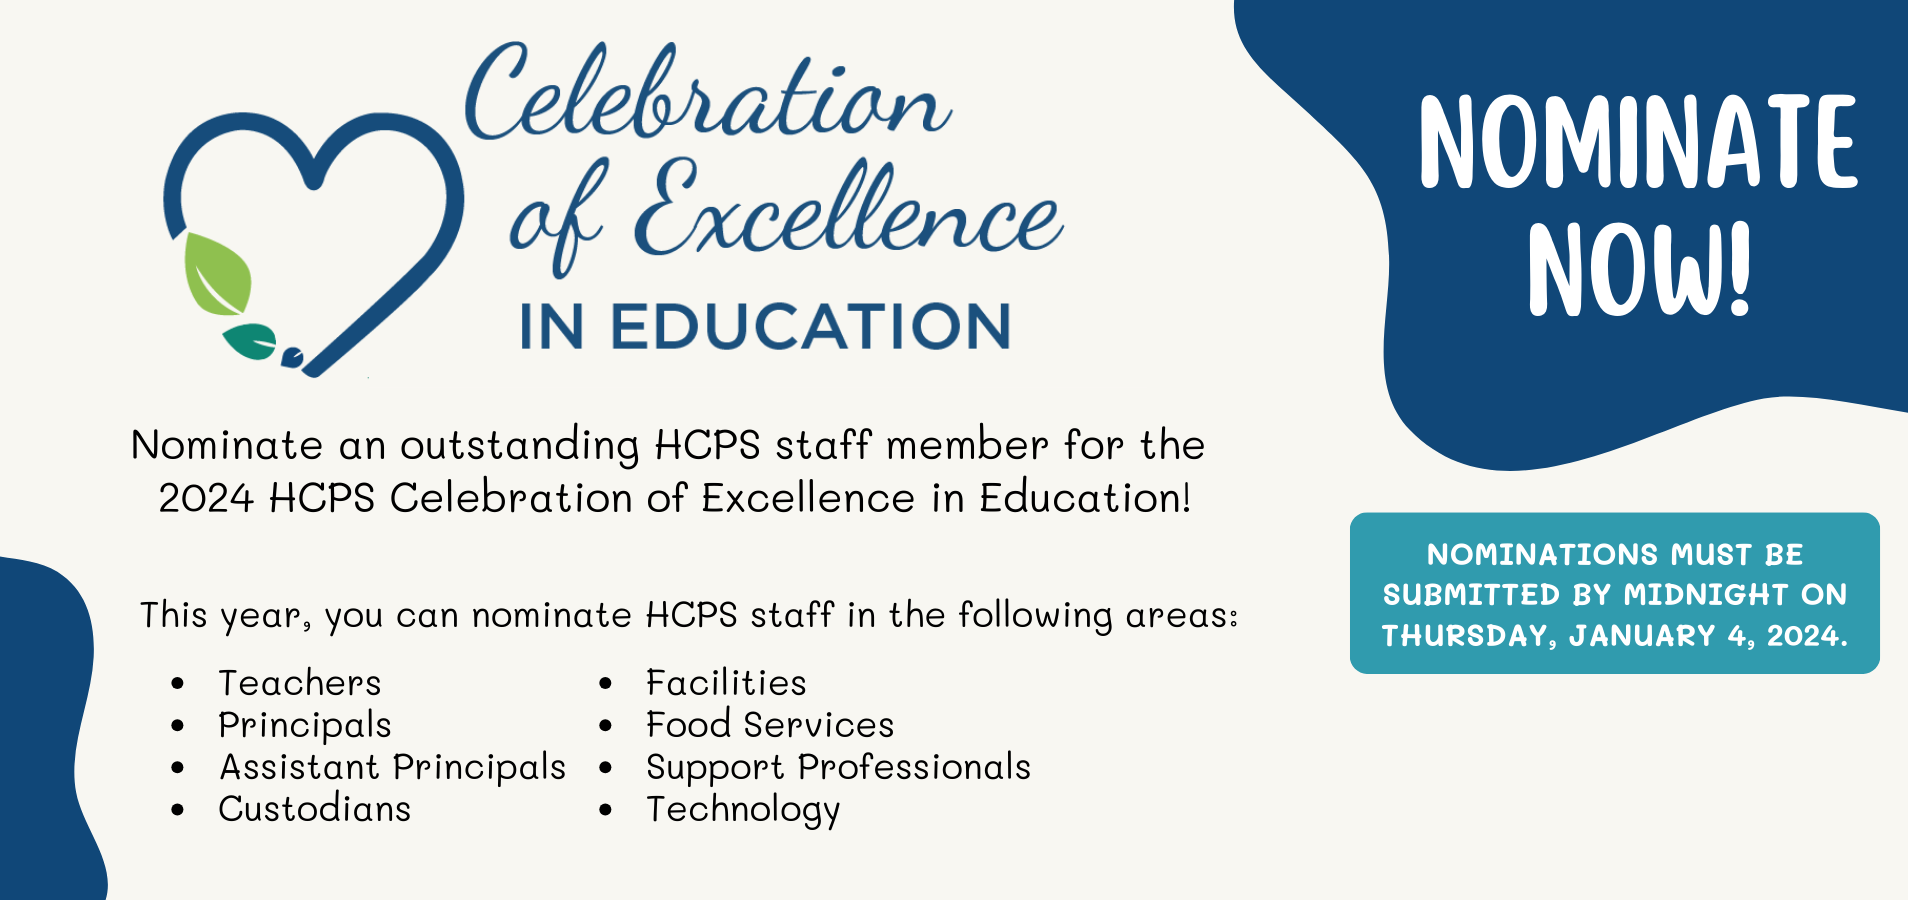 Nominate an HCPS staff member for the 2024 Celebration of Excellence in Education.